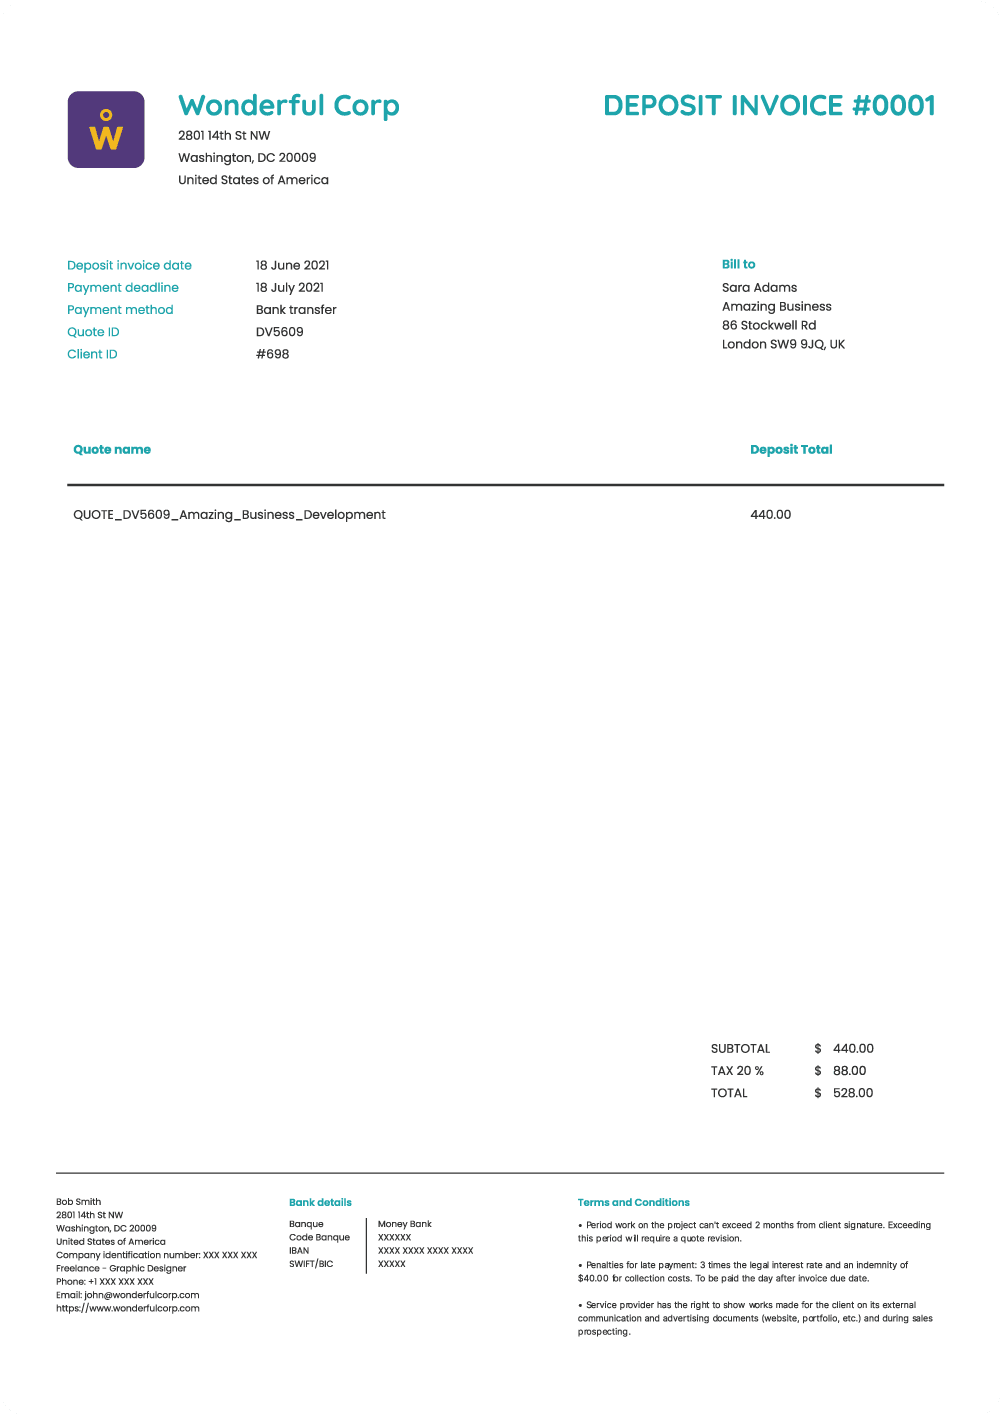 Deposit invoice preview